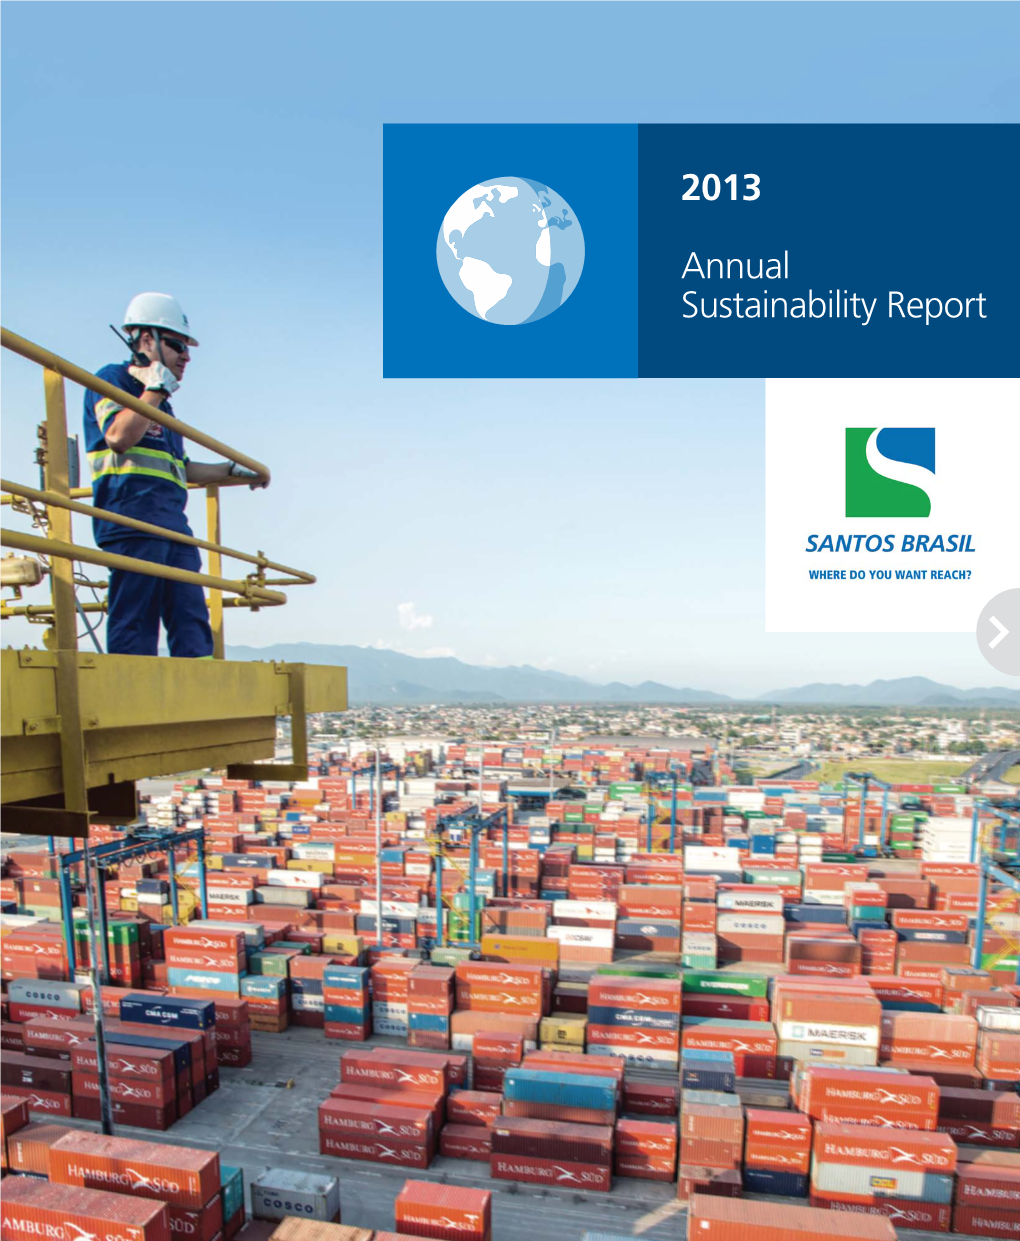 2013 Annual Sustainability Report